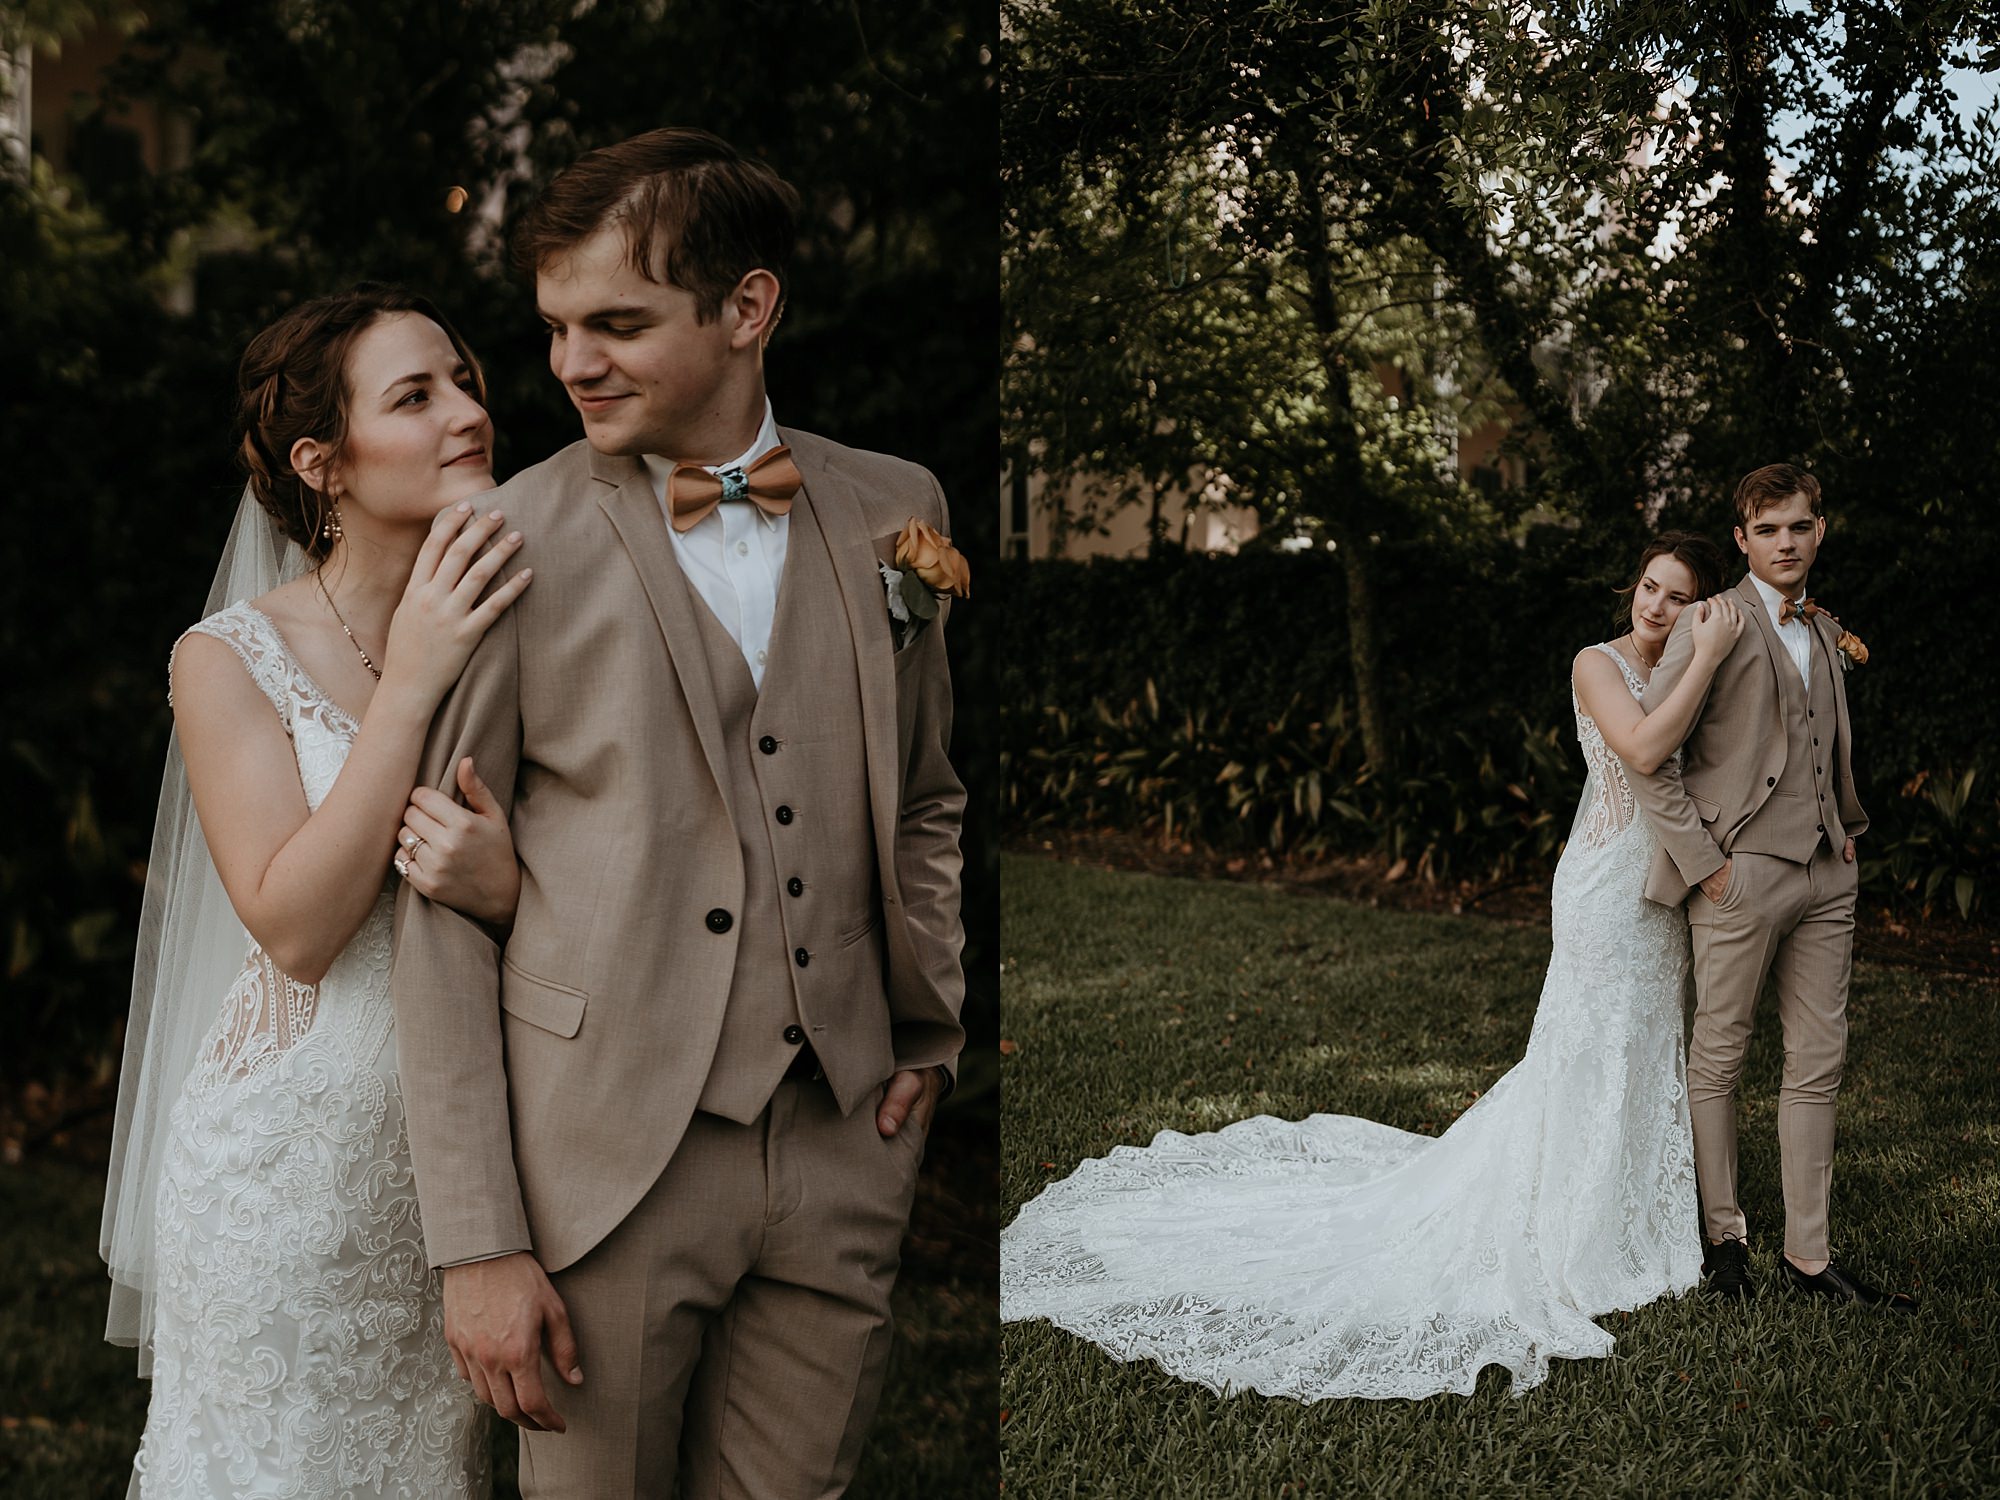 Intimate New Orleans Wedding